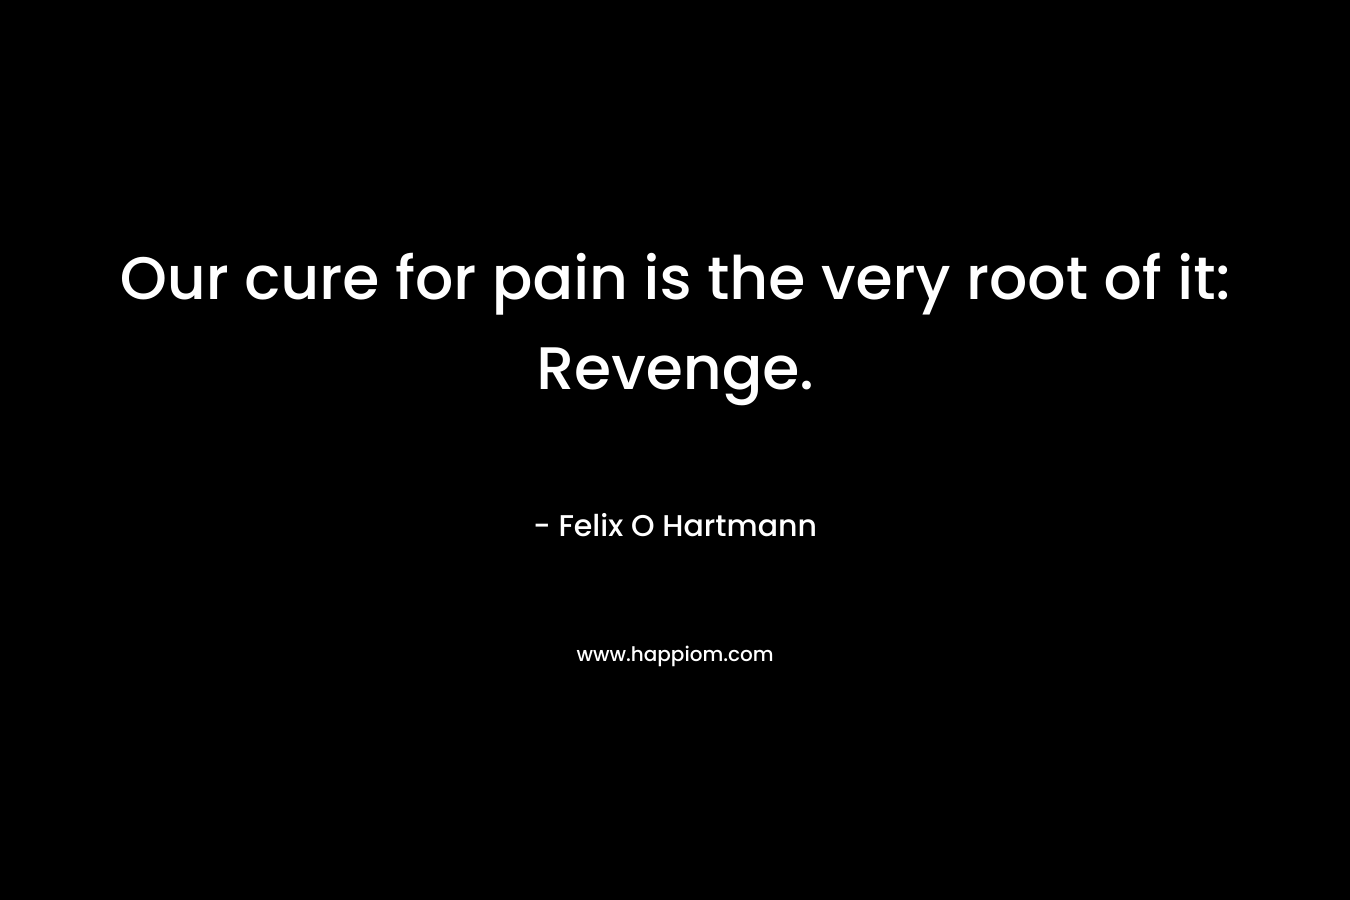 Our cure for pain is the very root of it: Revenge. – Felix O Hartmann